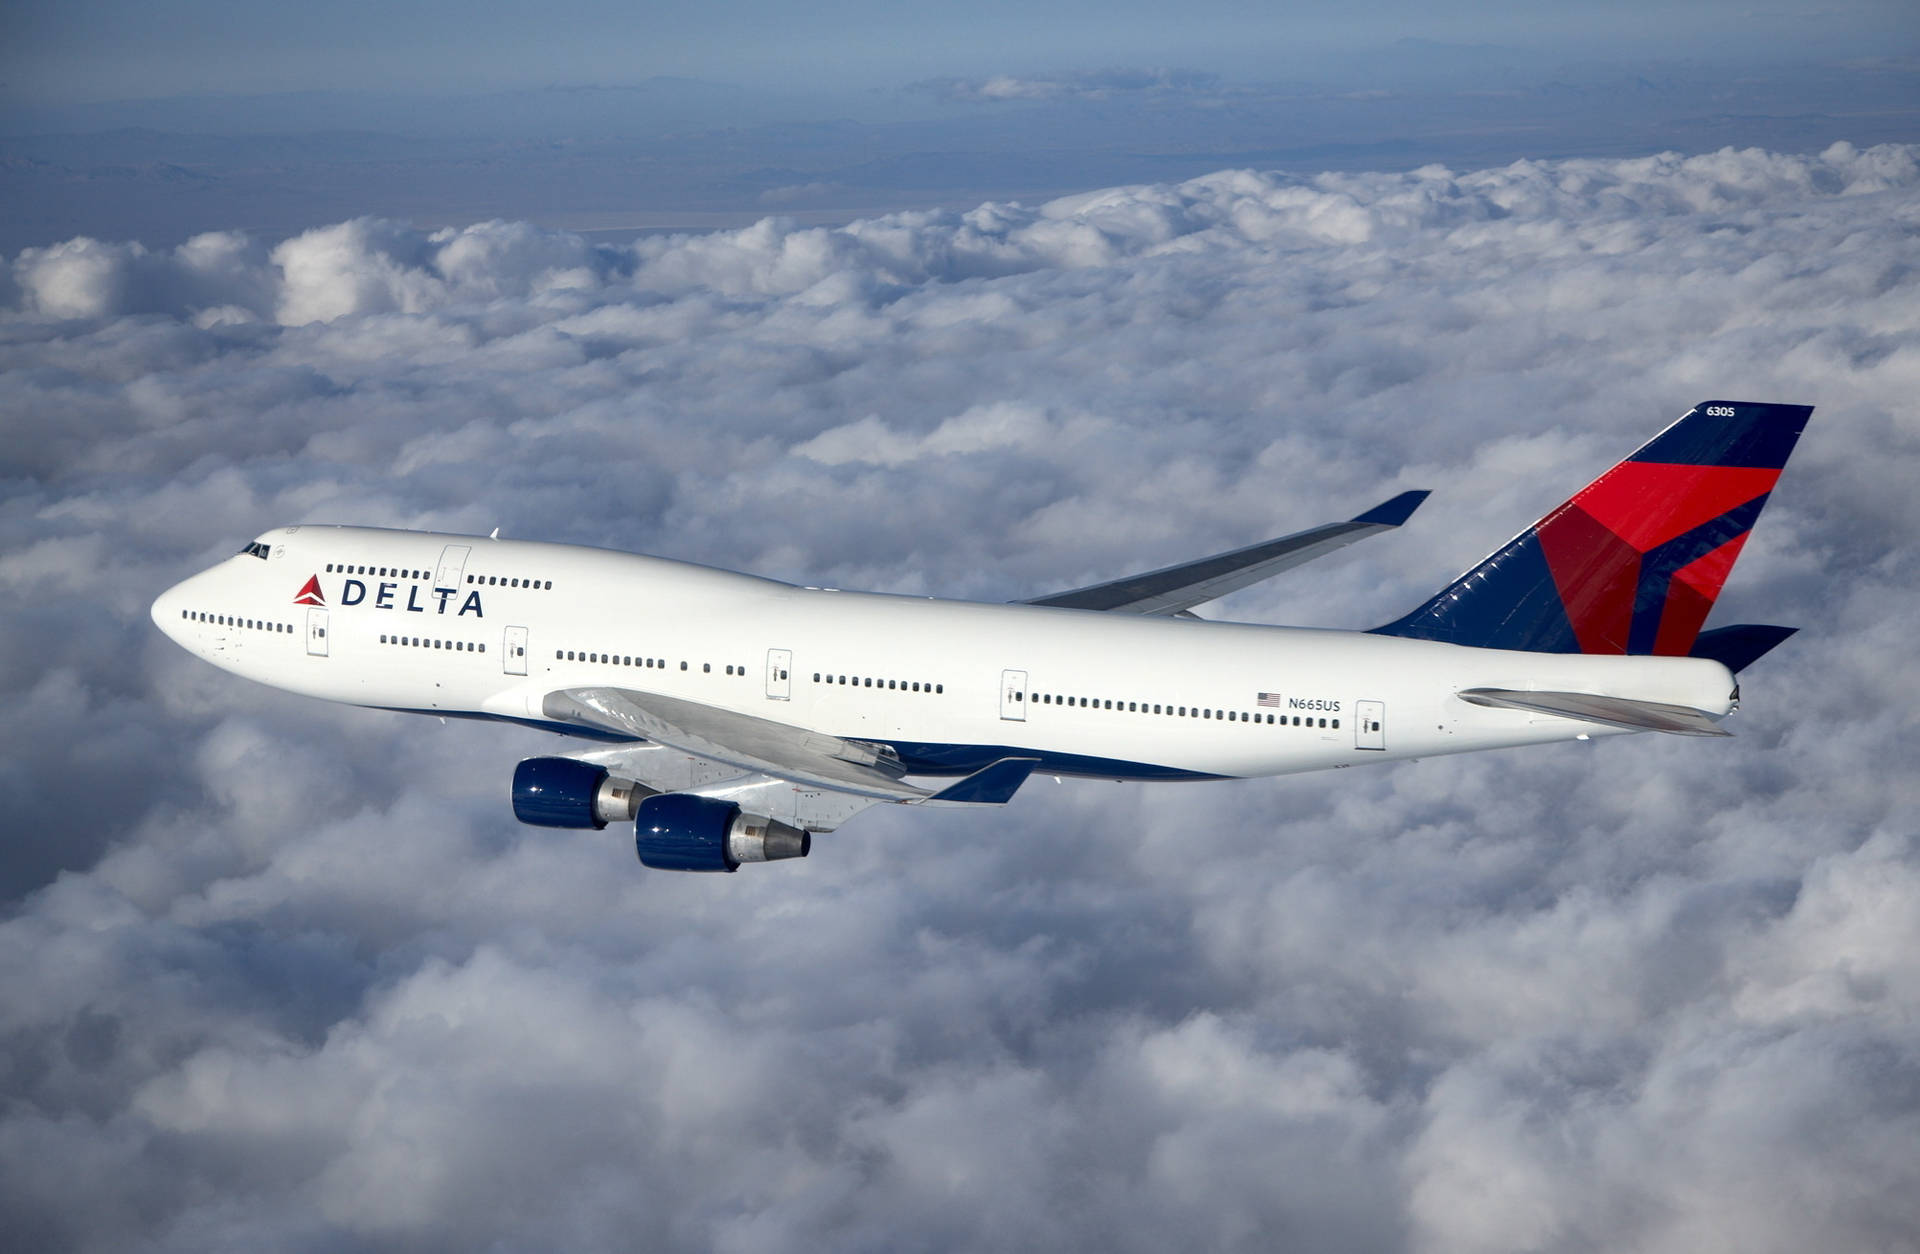 Delta Airlines Plane On Sea Of Gray Clouds Background